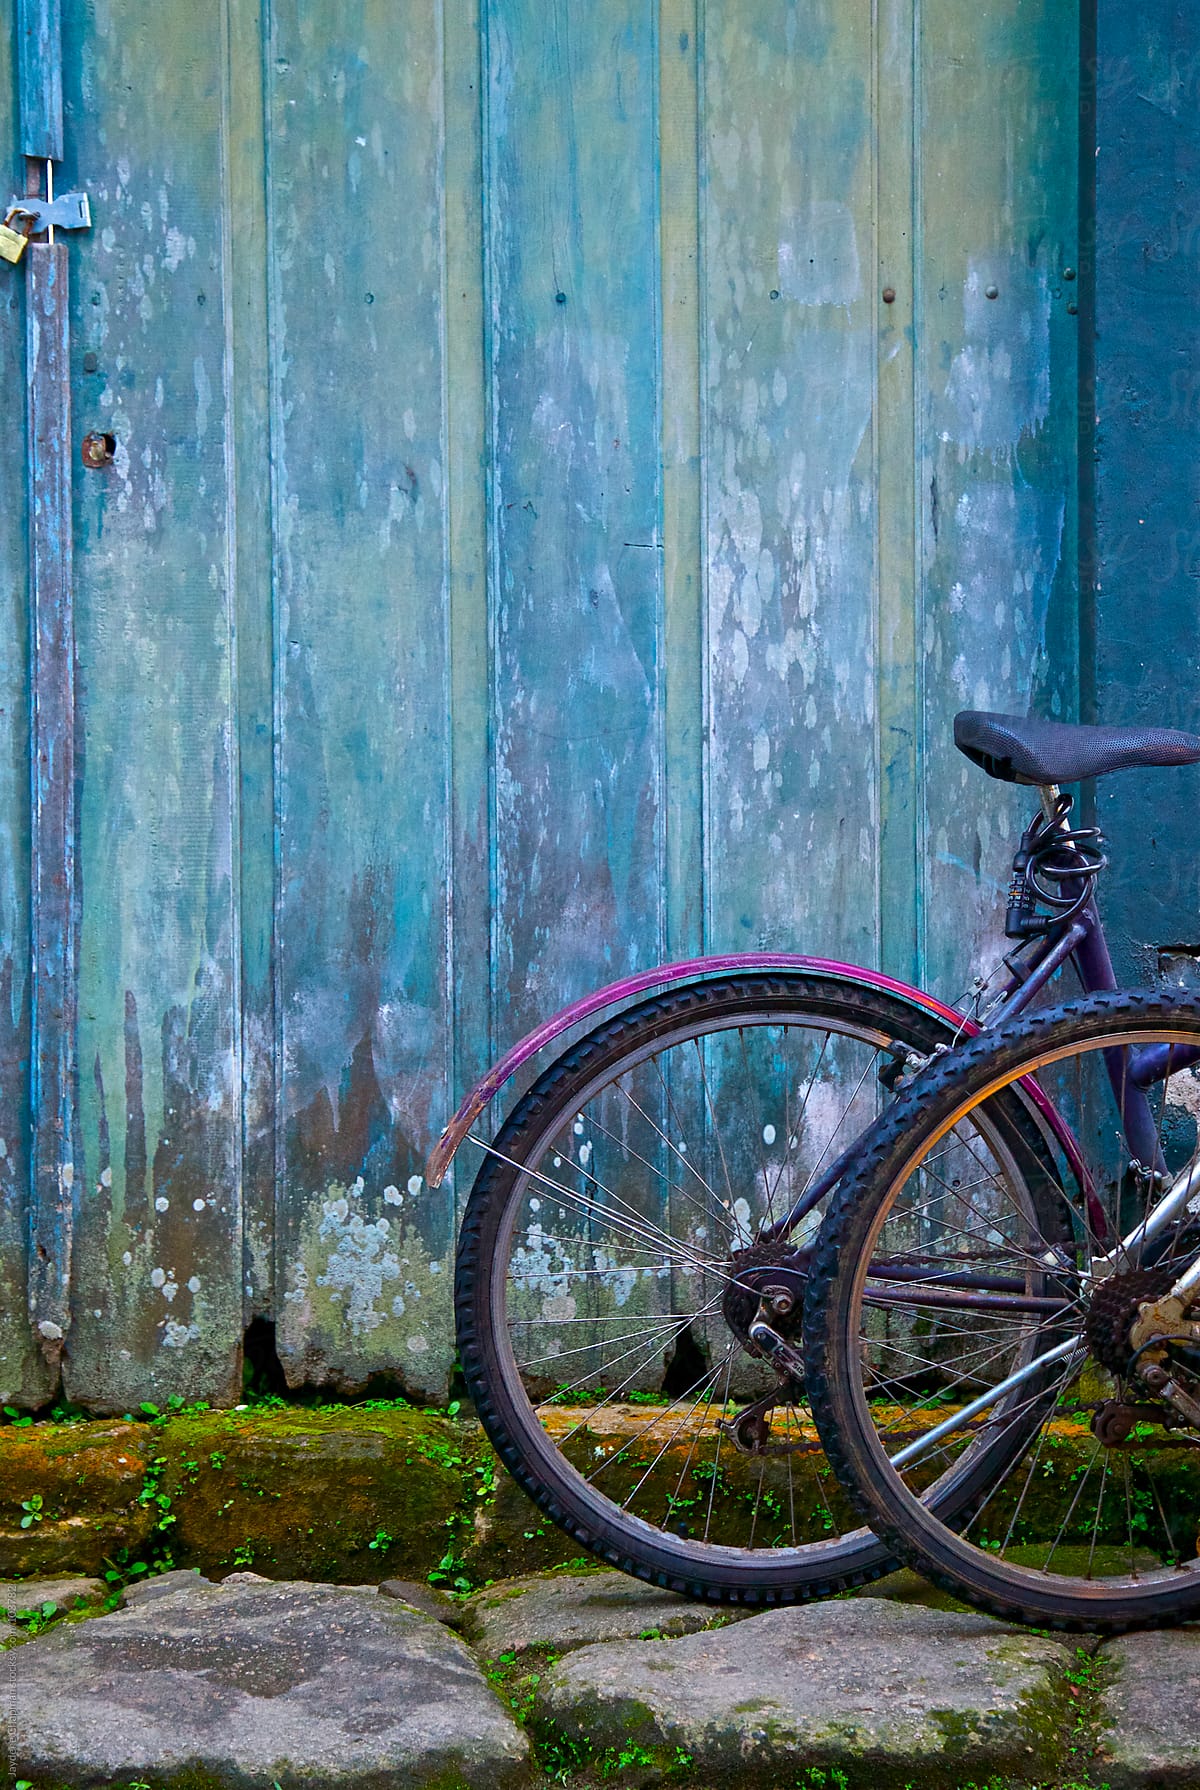 Bike outside an old blue painted wooden doored